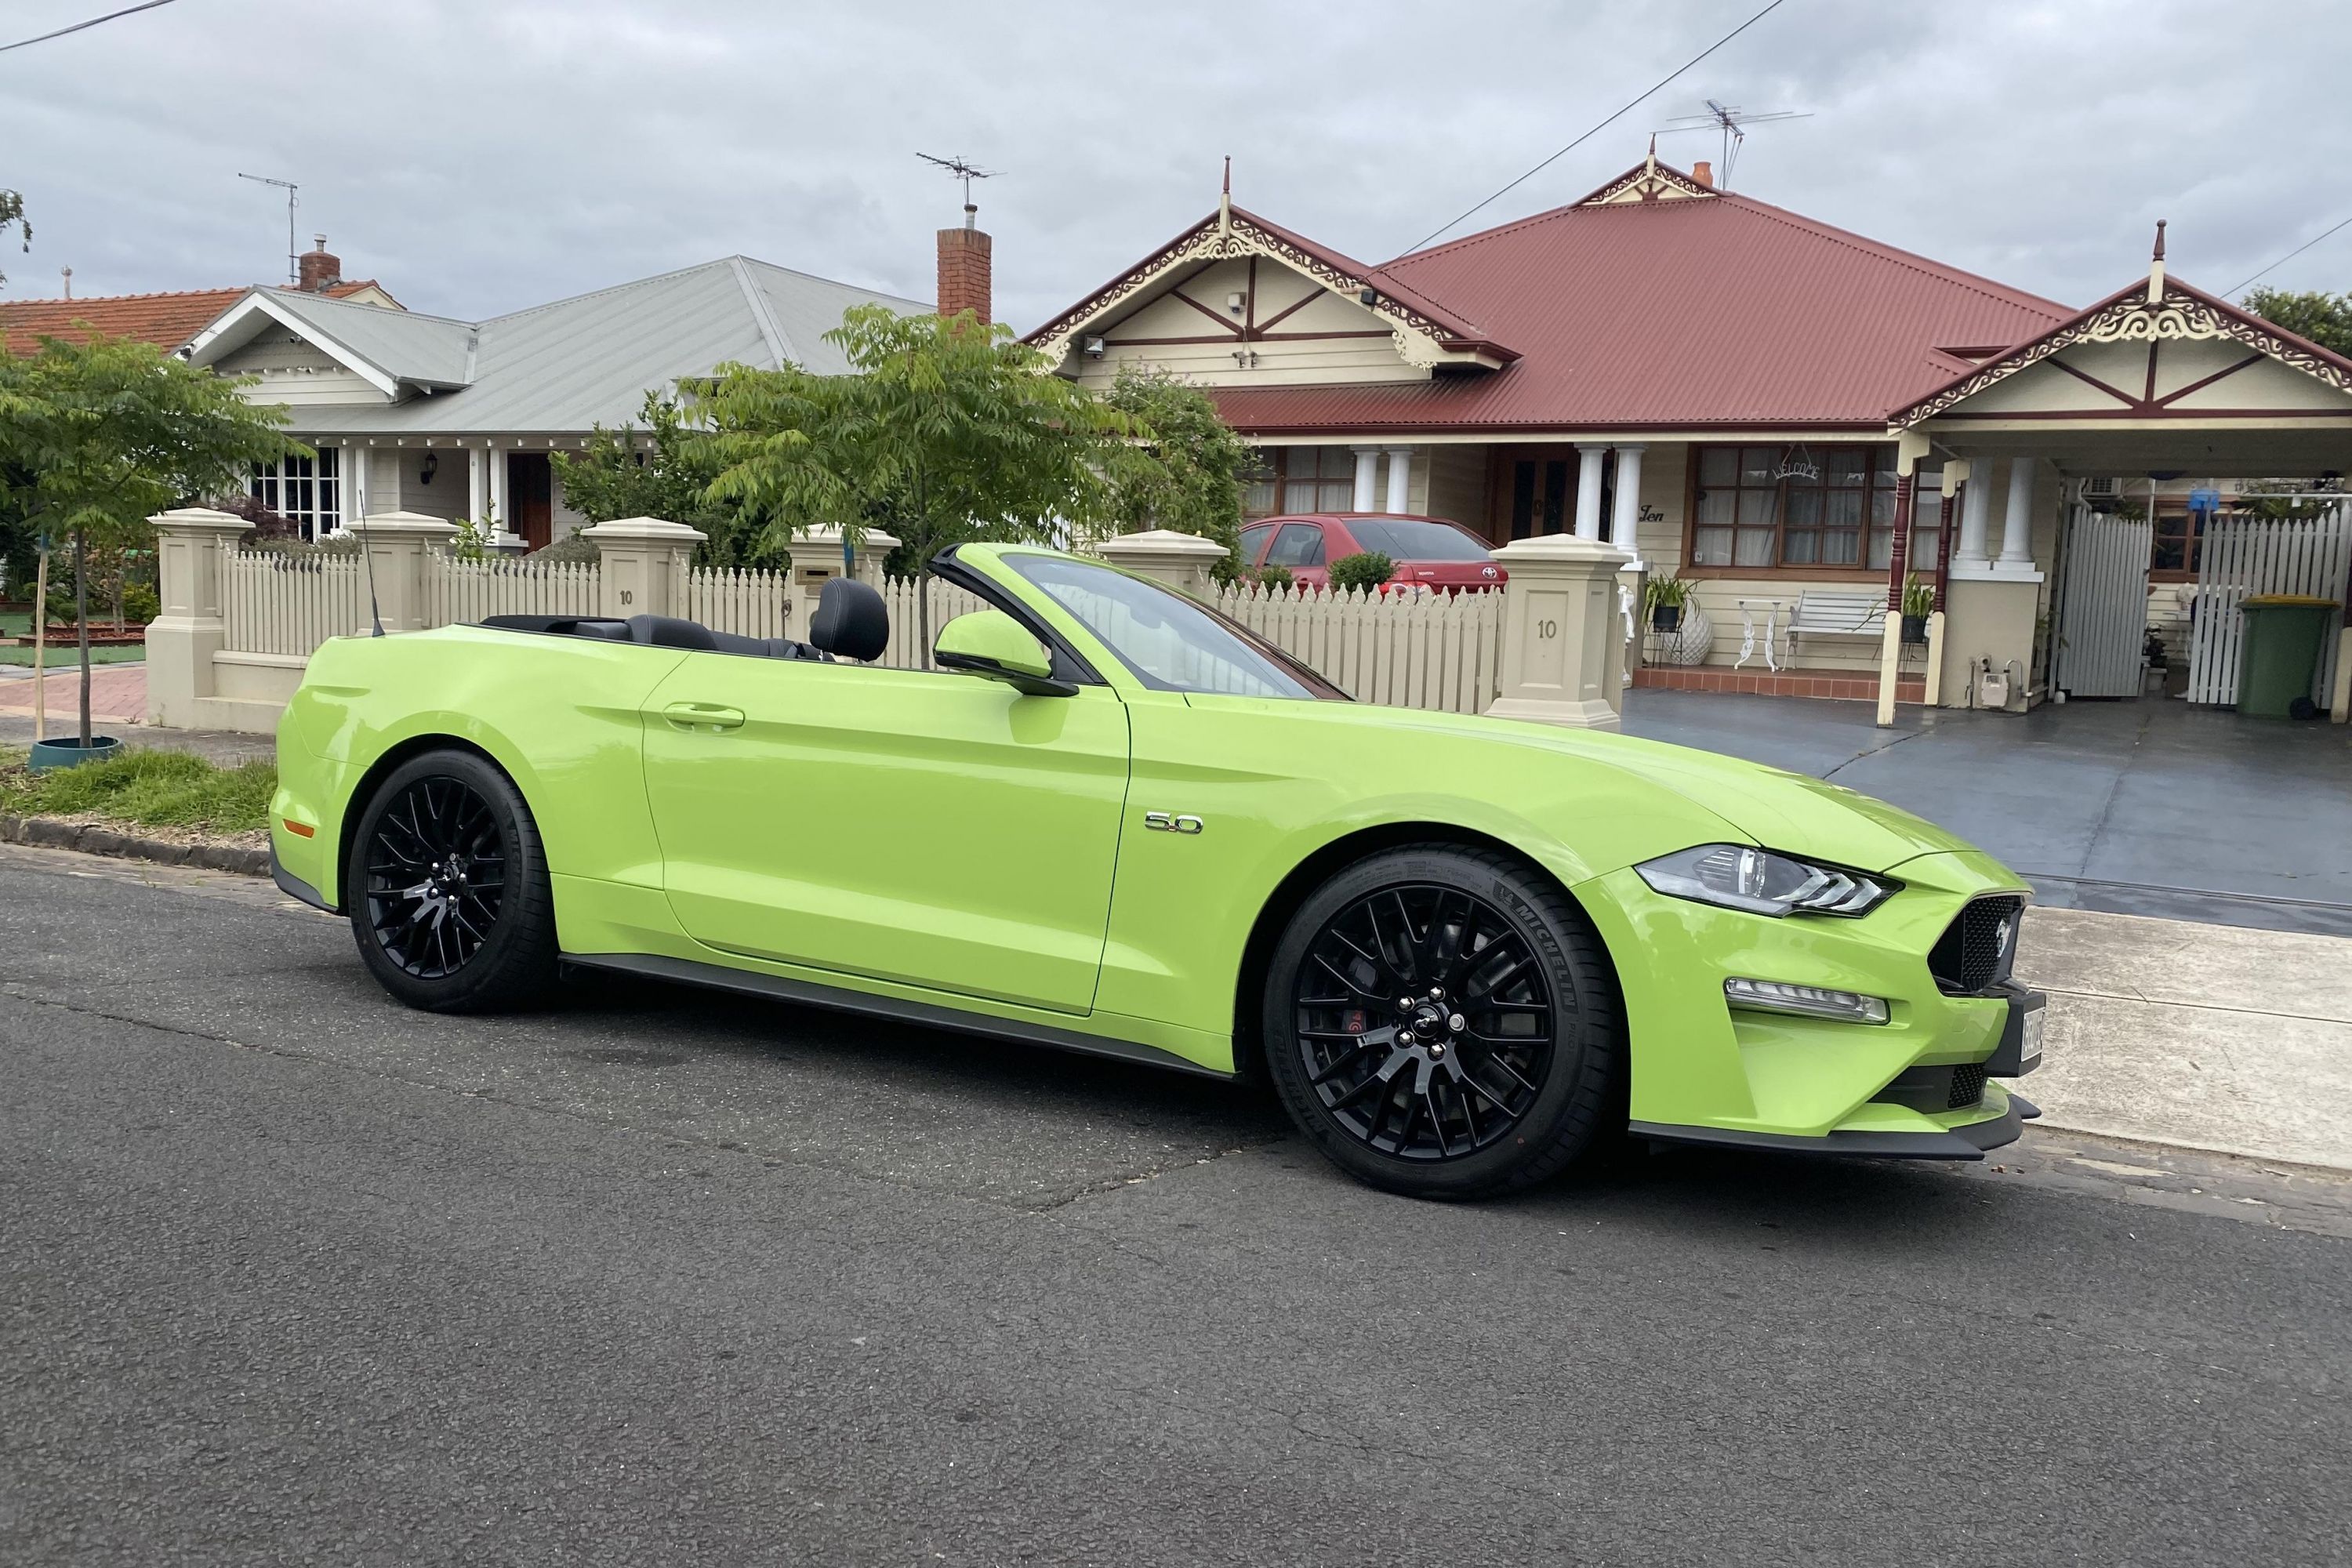 2021 Mustang Gt Convertible Review
